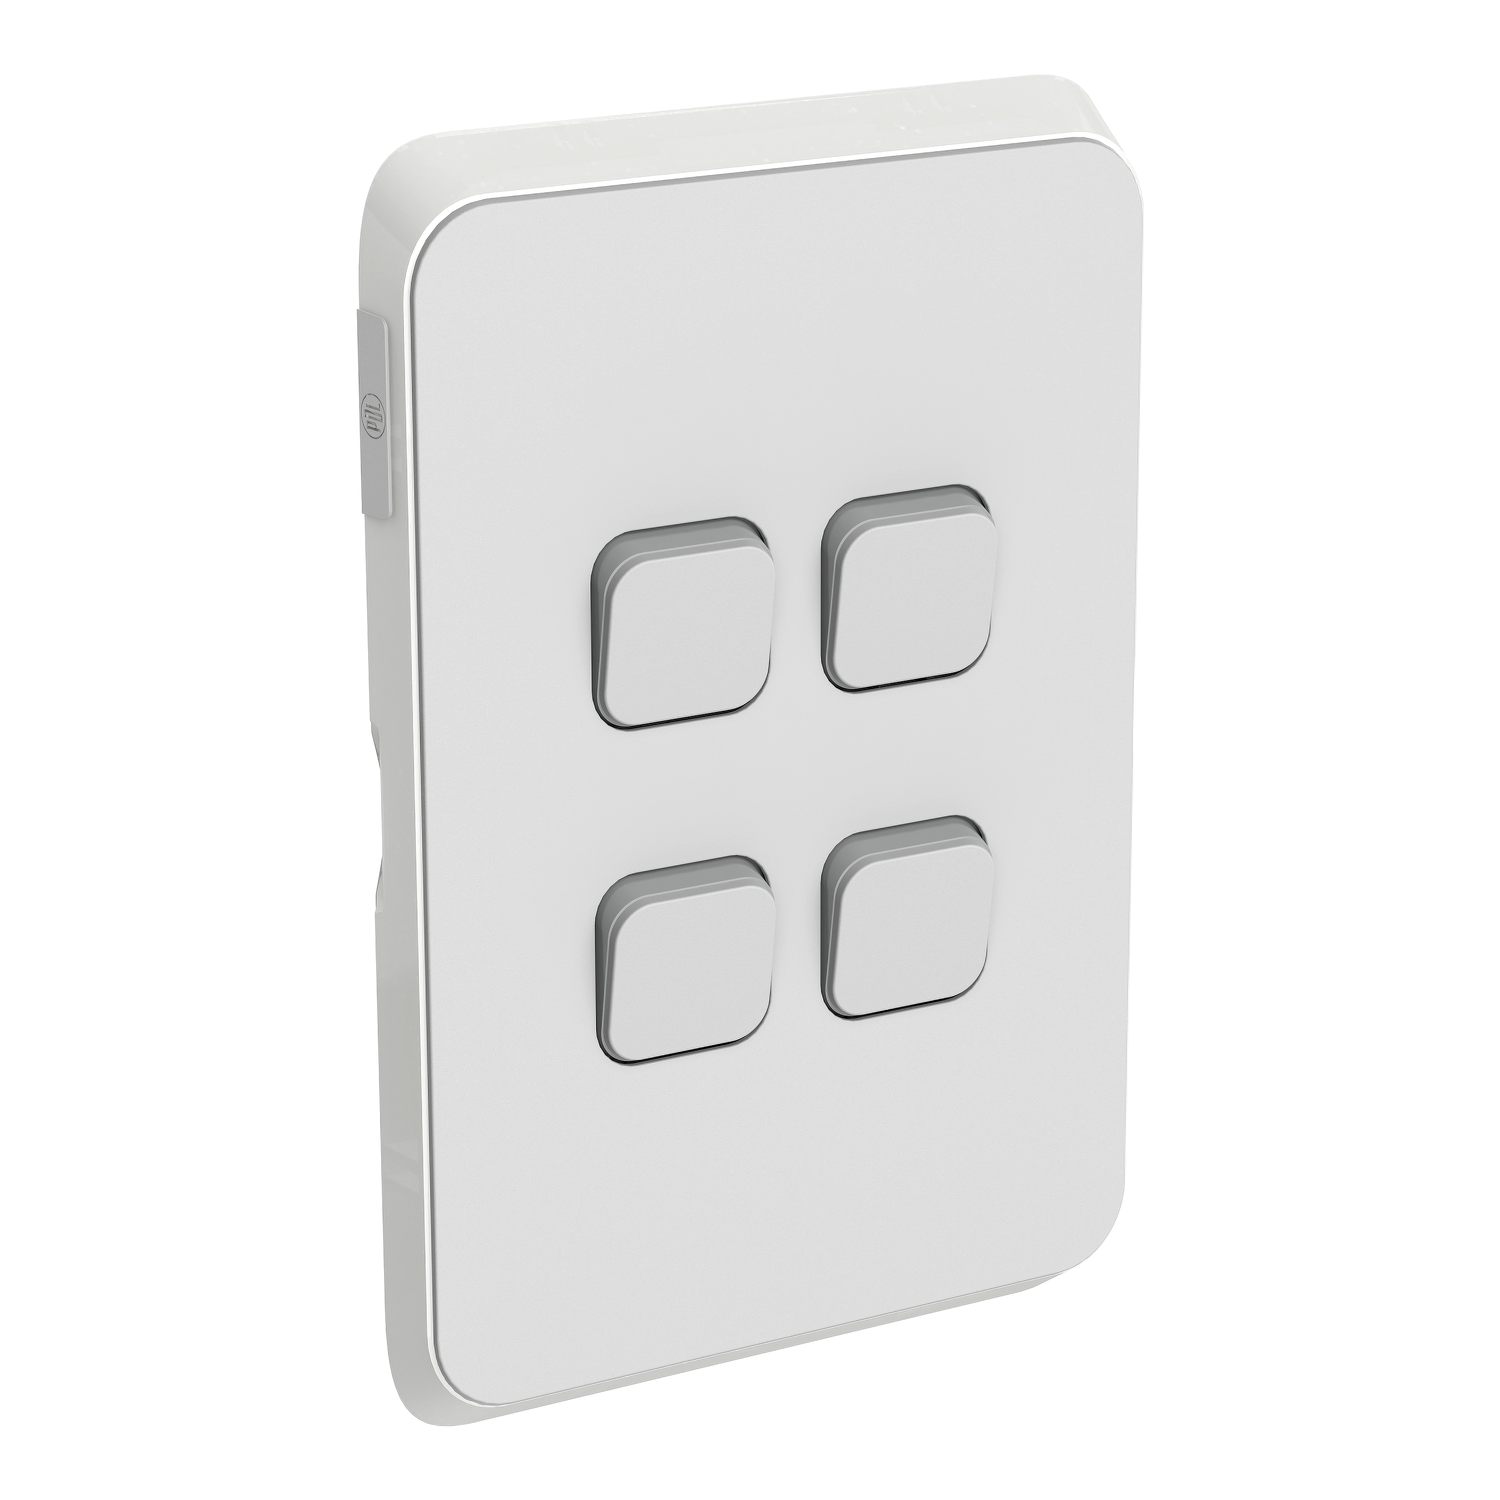 PDL Iconic - Cover Plate Switch 4-Gang - Cool Grey